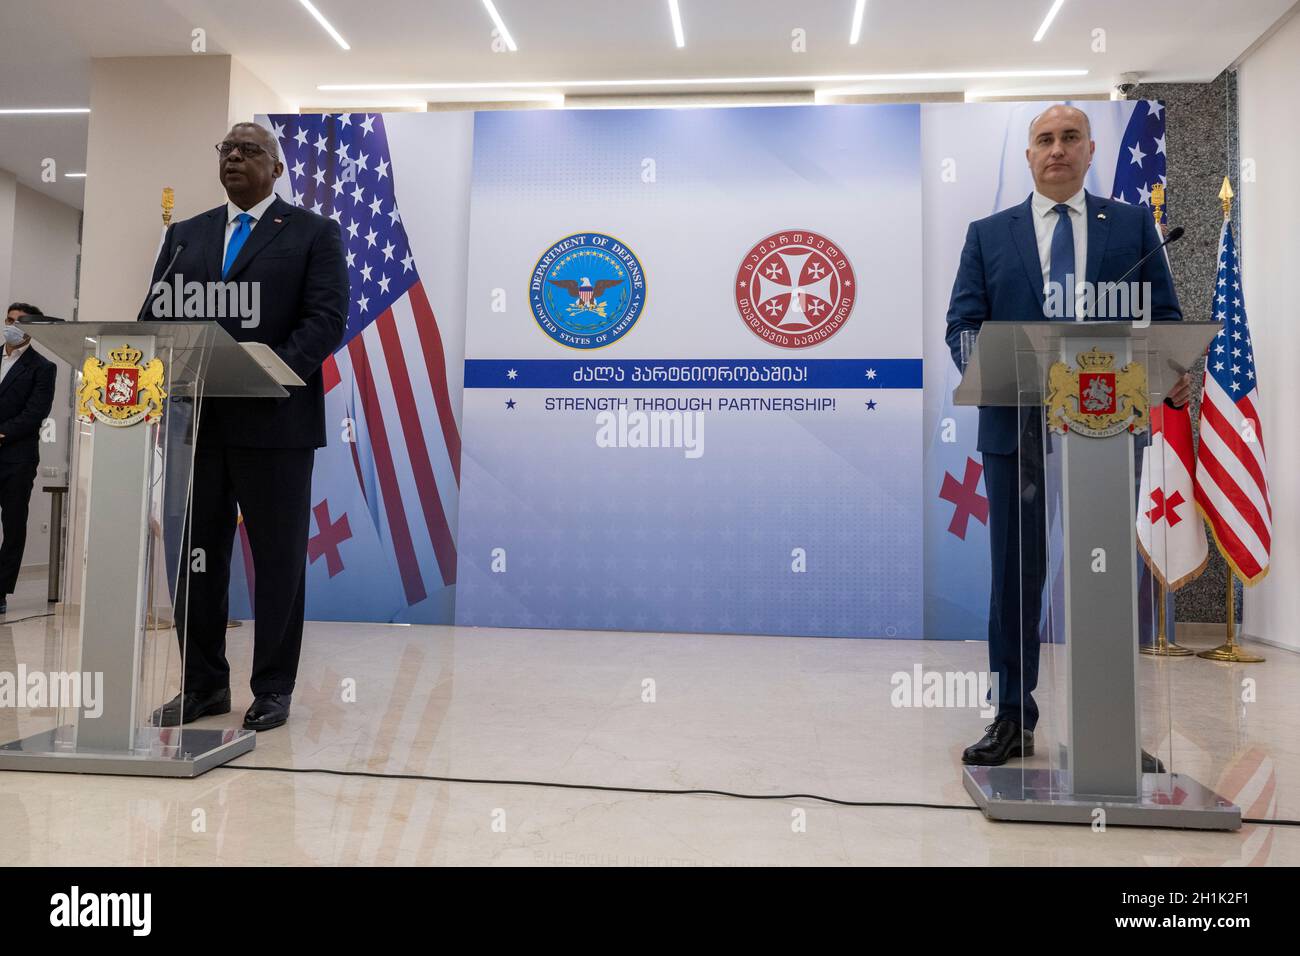 Tbilisi, Georgia. 18th Oct, 2021. U.S. Secretary of Defense Lloyd J. Austin III, listens to a question during a joint press conference with Georgian Minister of Defense Juansher Burchuladze, right, at the Georgian Ministry of Defense October 18, 2021 in Tbilisi, Georgia. Austin is in Tbilisi to reaffirm U.S. support for sovereignty and territorial integrity. Credit: Chad McNeeley/DOD/Alamy Live News Stock Photo